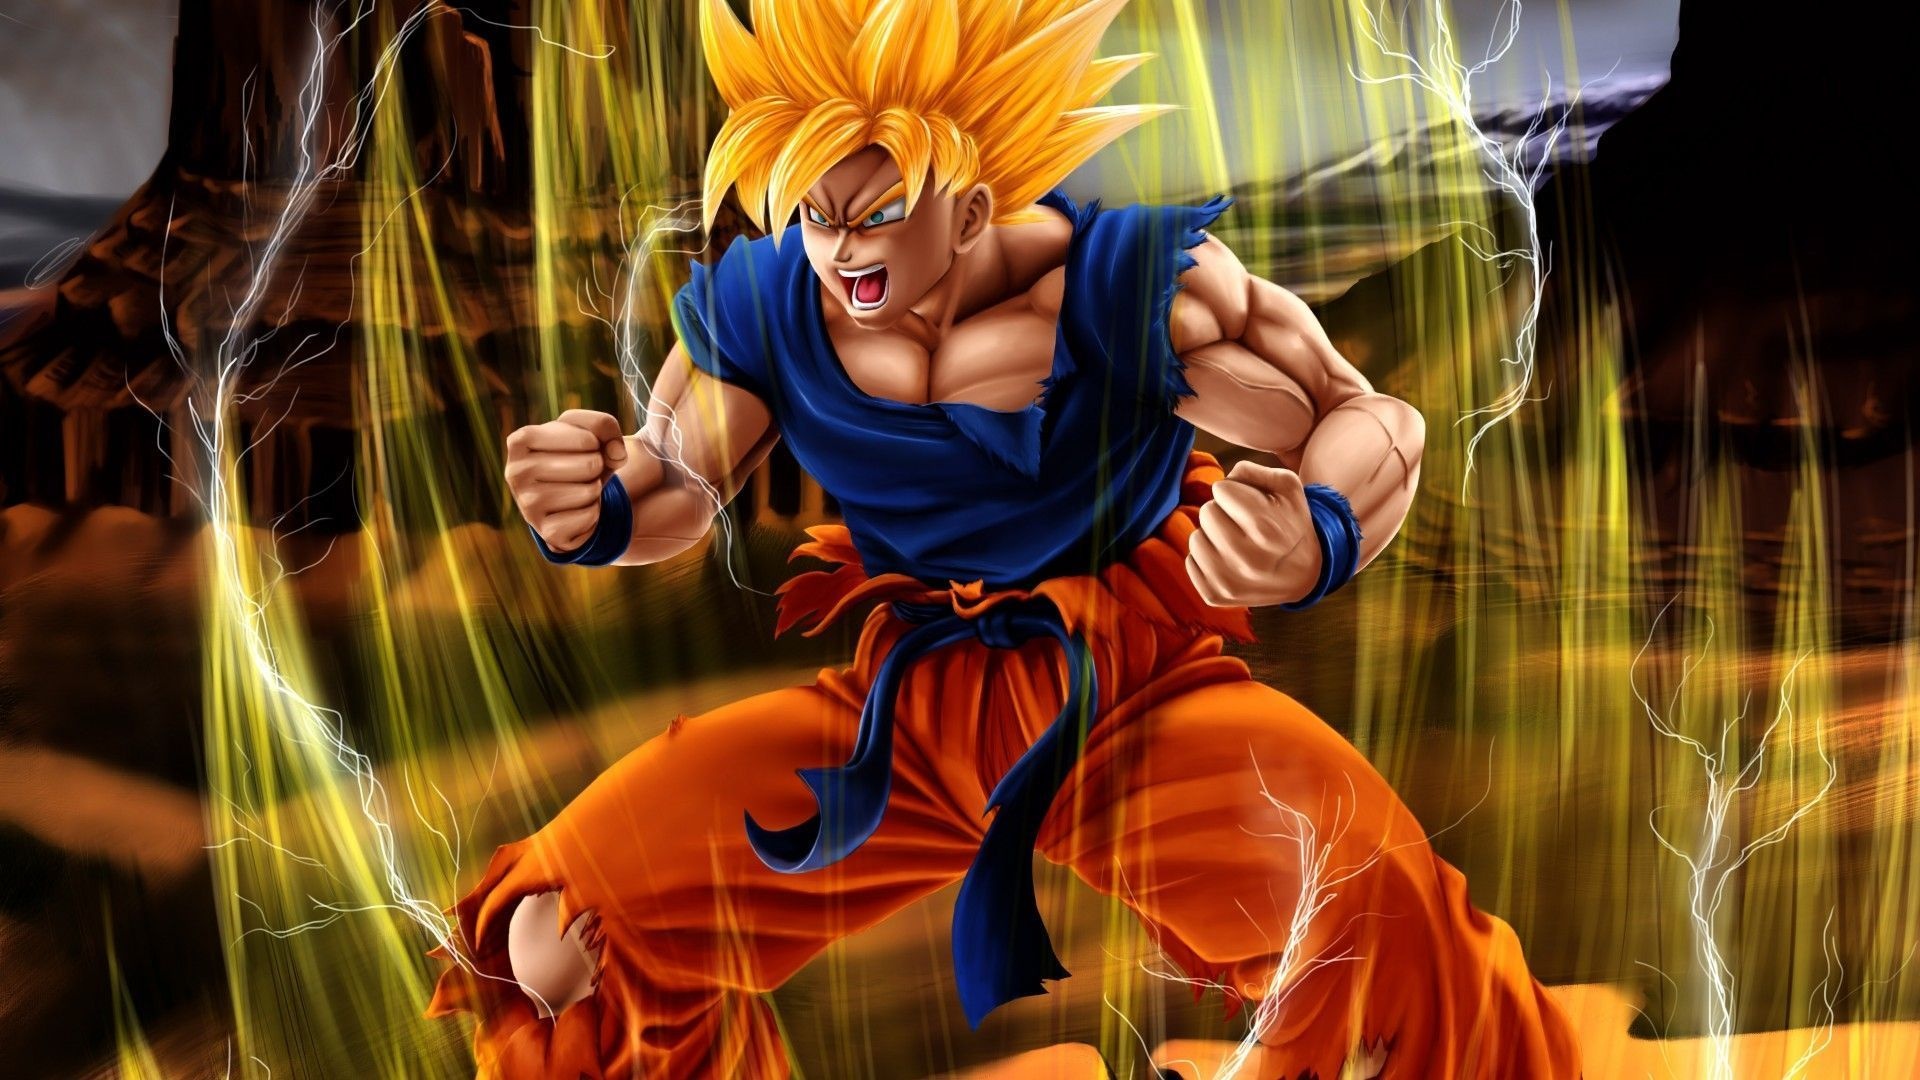 Dragon Ball Z Abridged, Live wallpaper for PC, Animated backgrounds, Interactive experience, 1920x1080 Full HD Desktop